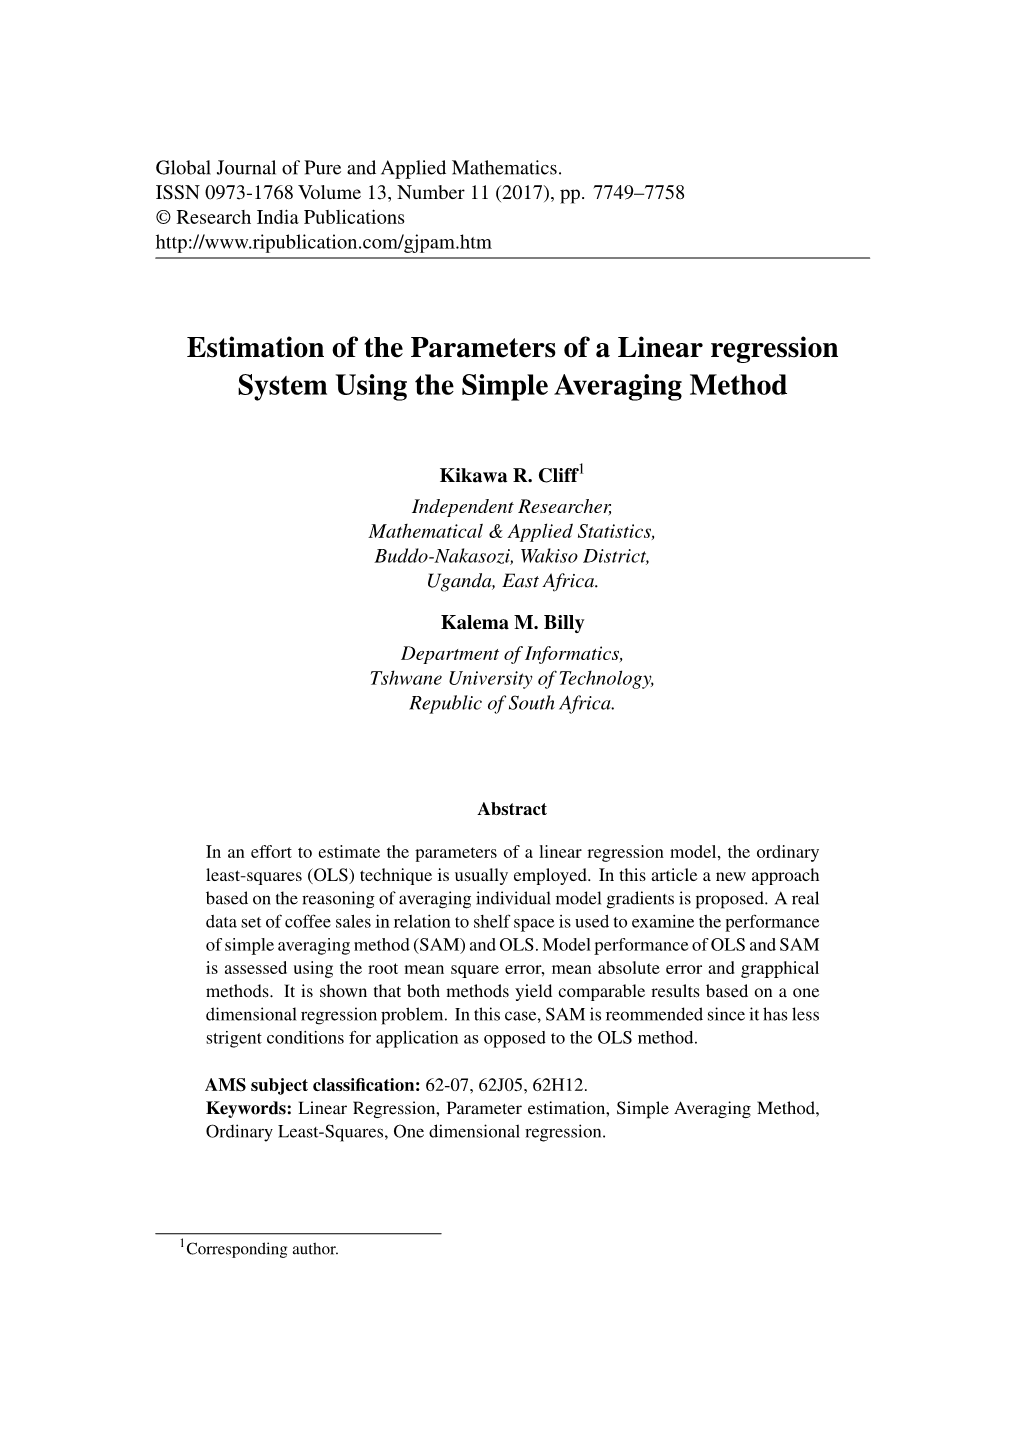 Estimation of the Parameters of a Linear Regression System Using the Simple Averaging Method